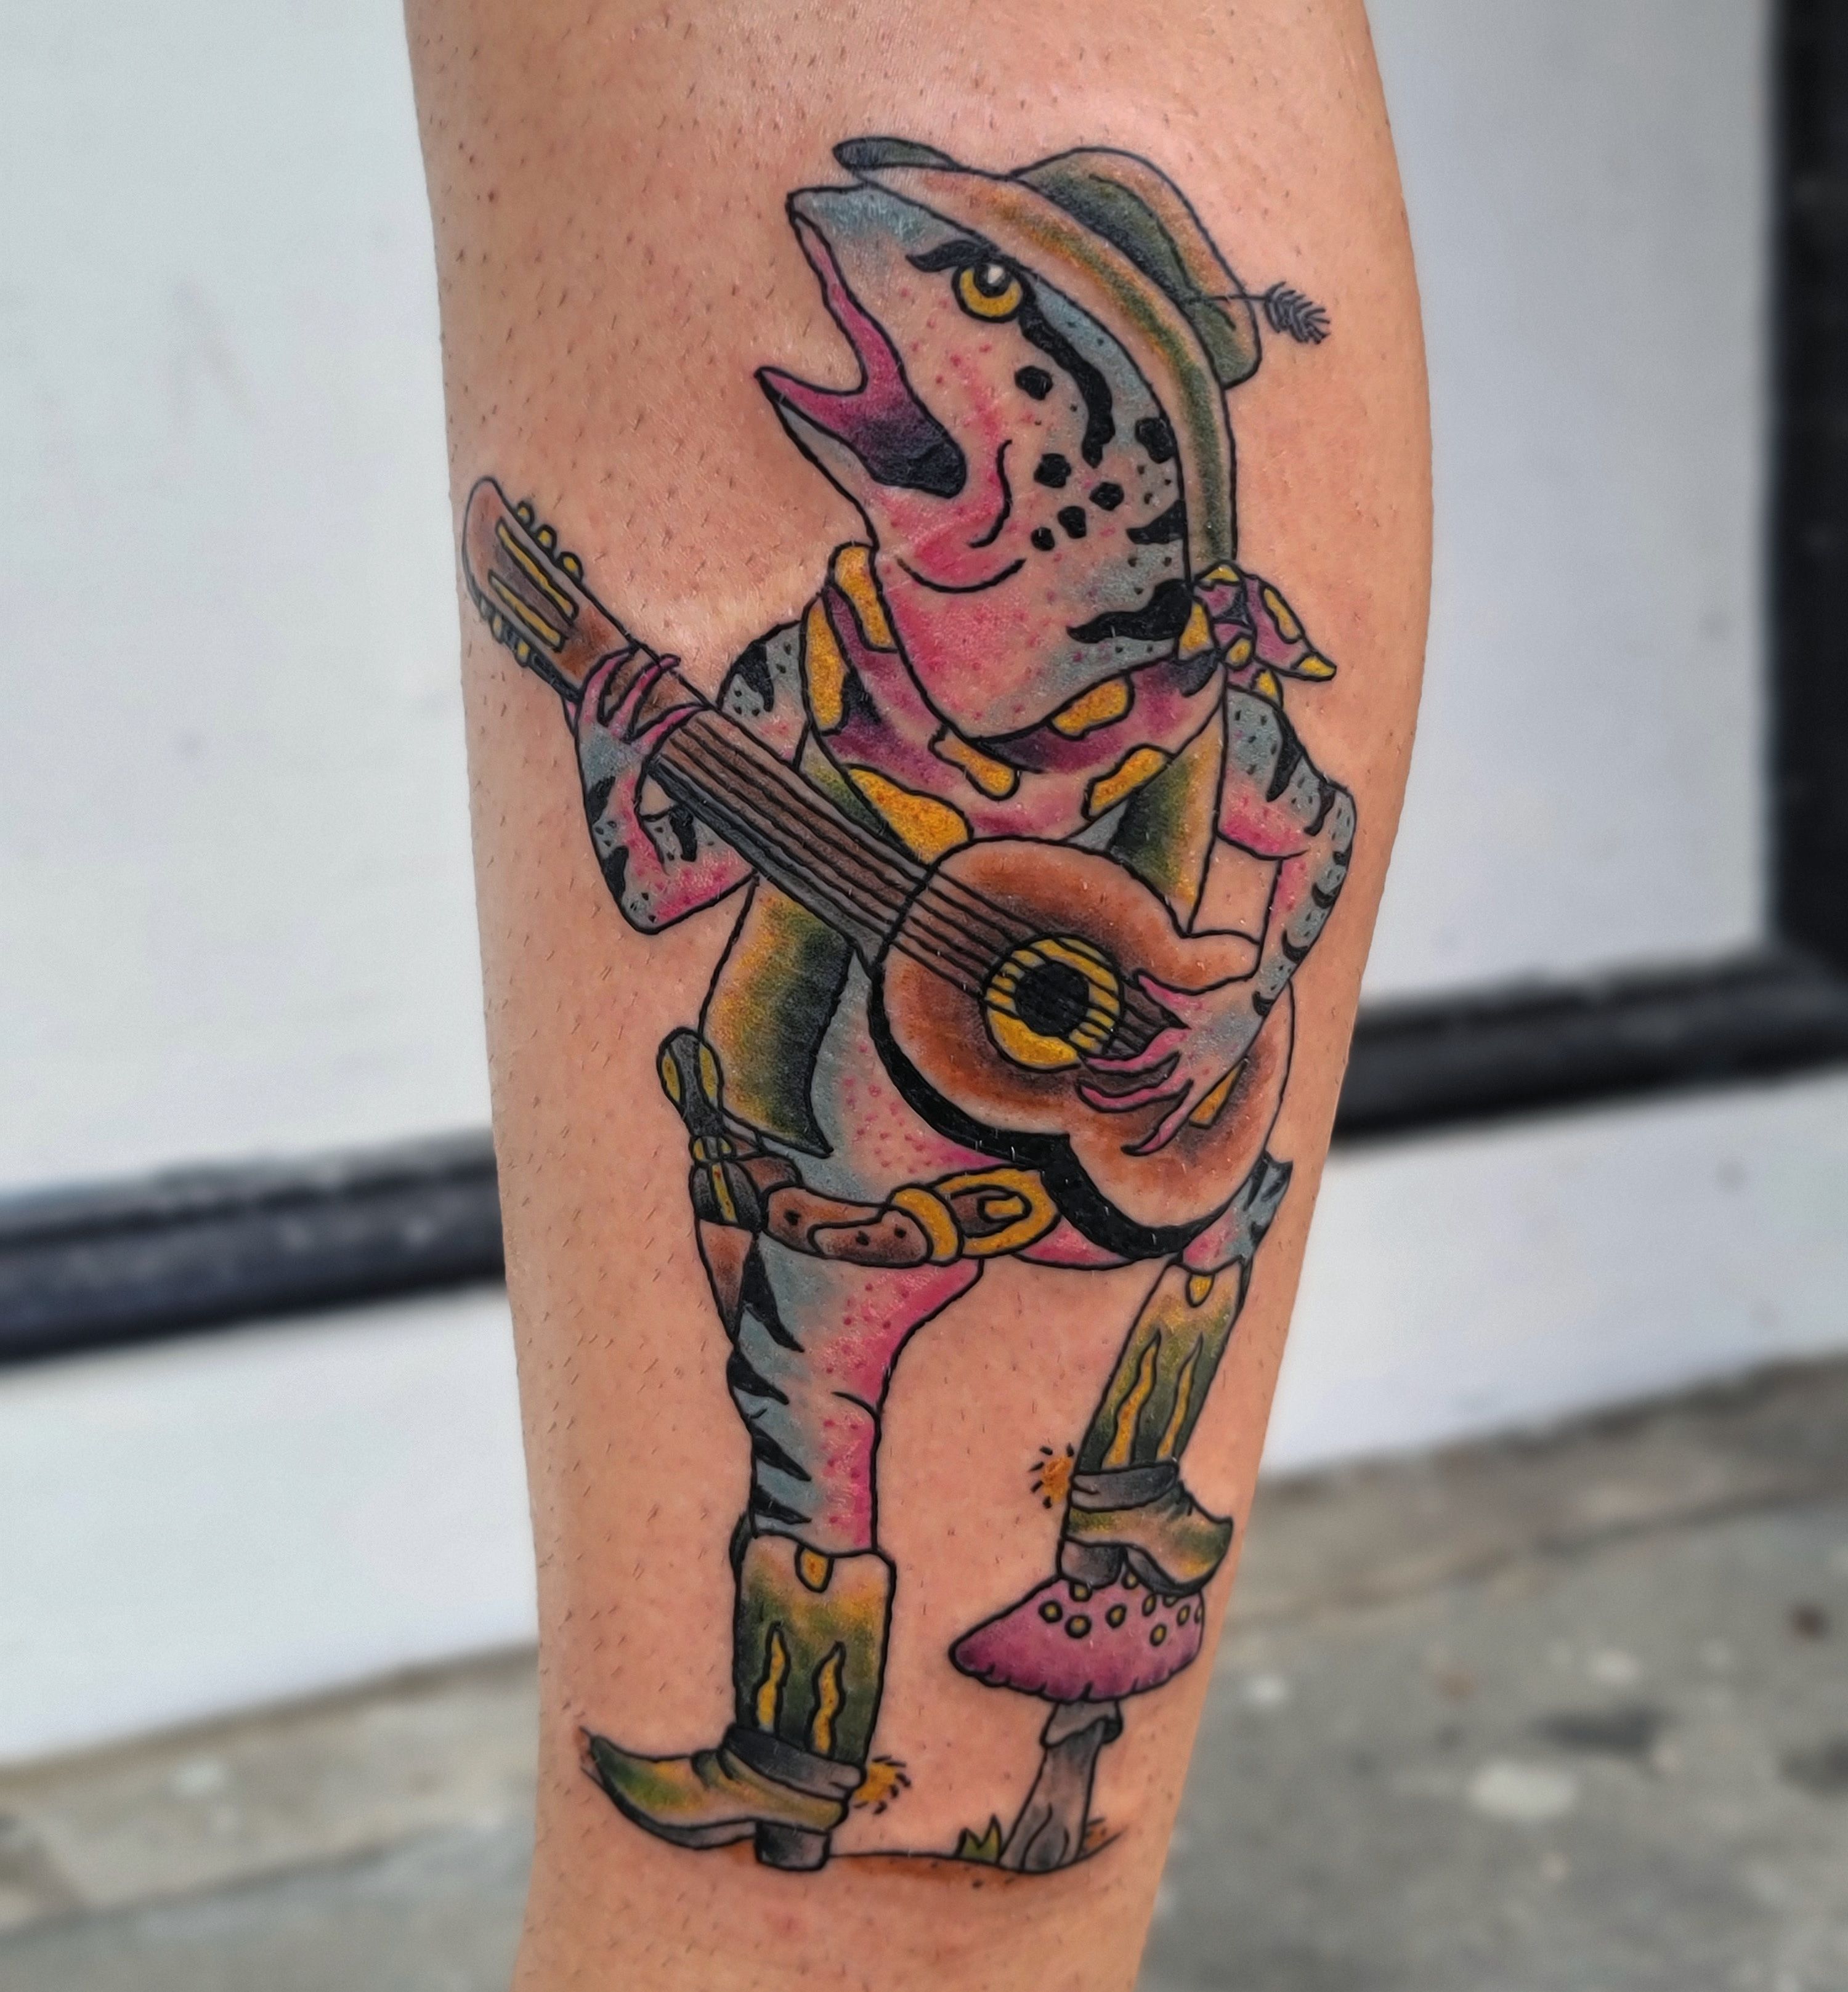 Frog playing banjo but it looks like a strat done by Rebeka Kichler   Locomotive tattoo in Budapest Hungary  rtattoos